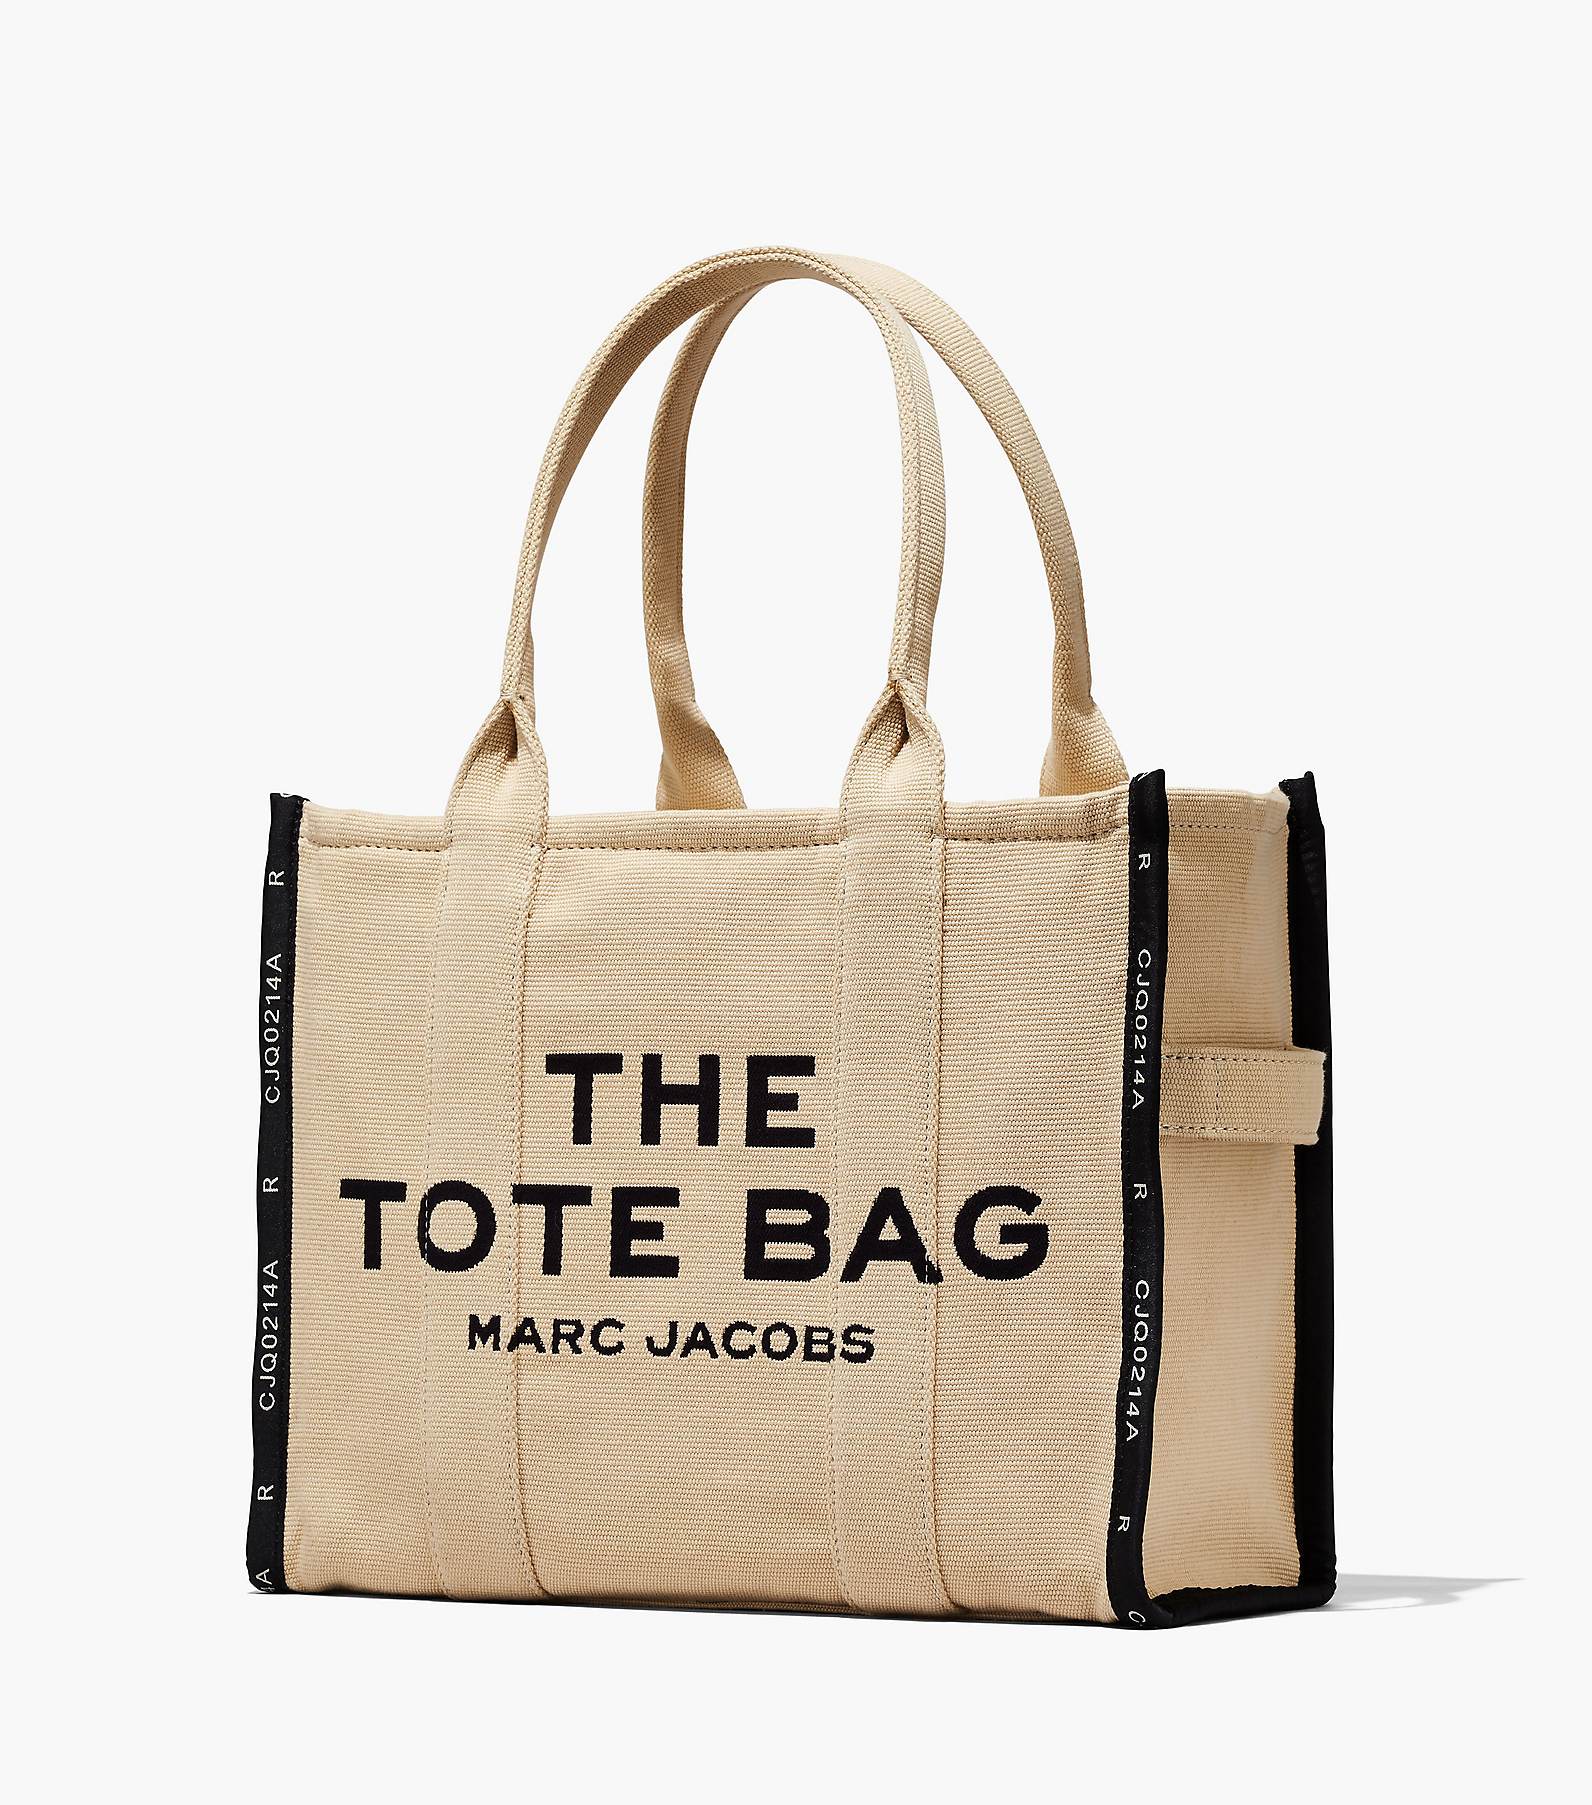 The Large canvas tote bag in blue - Marc Jacobs